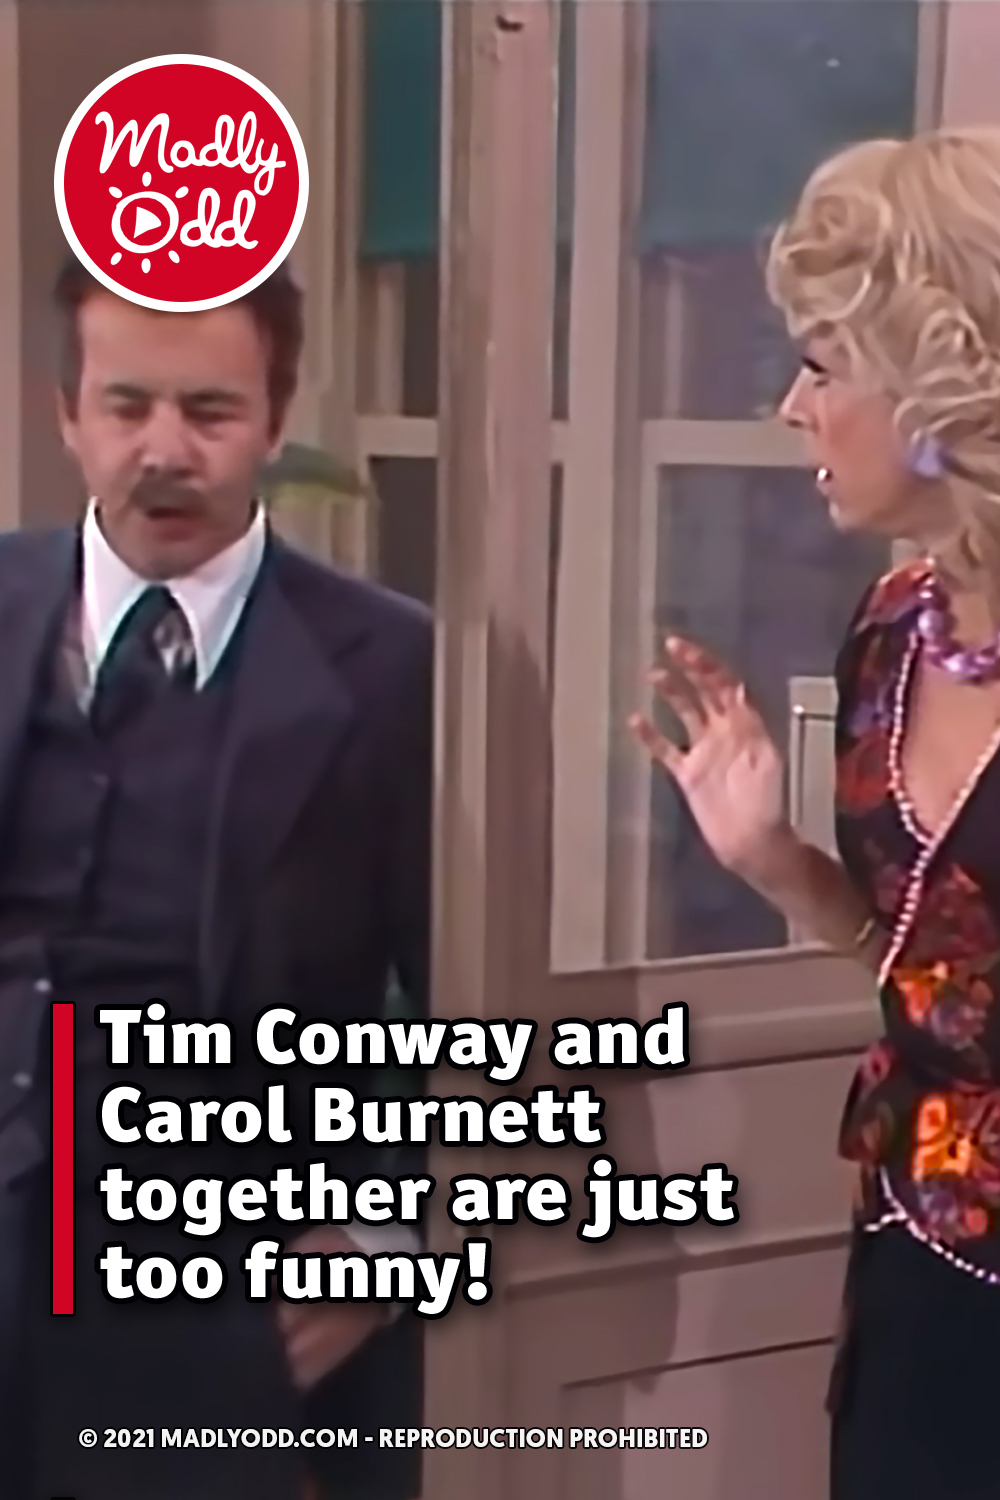 Tim Conway and Carol Burnett together are just too funny!